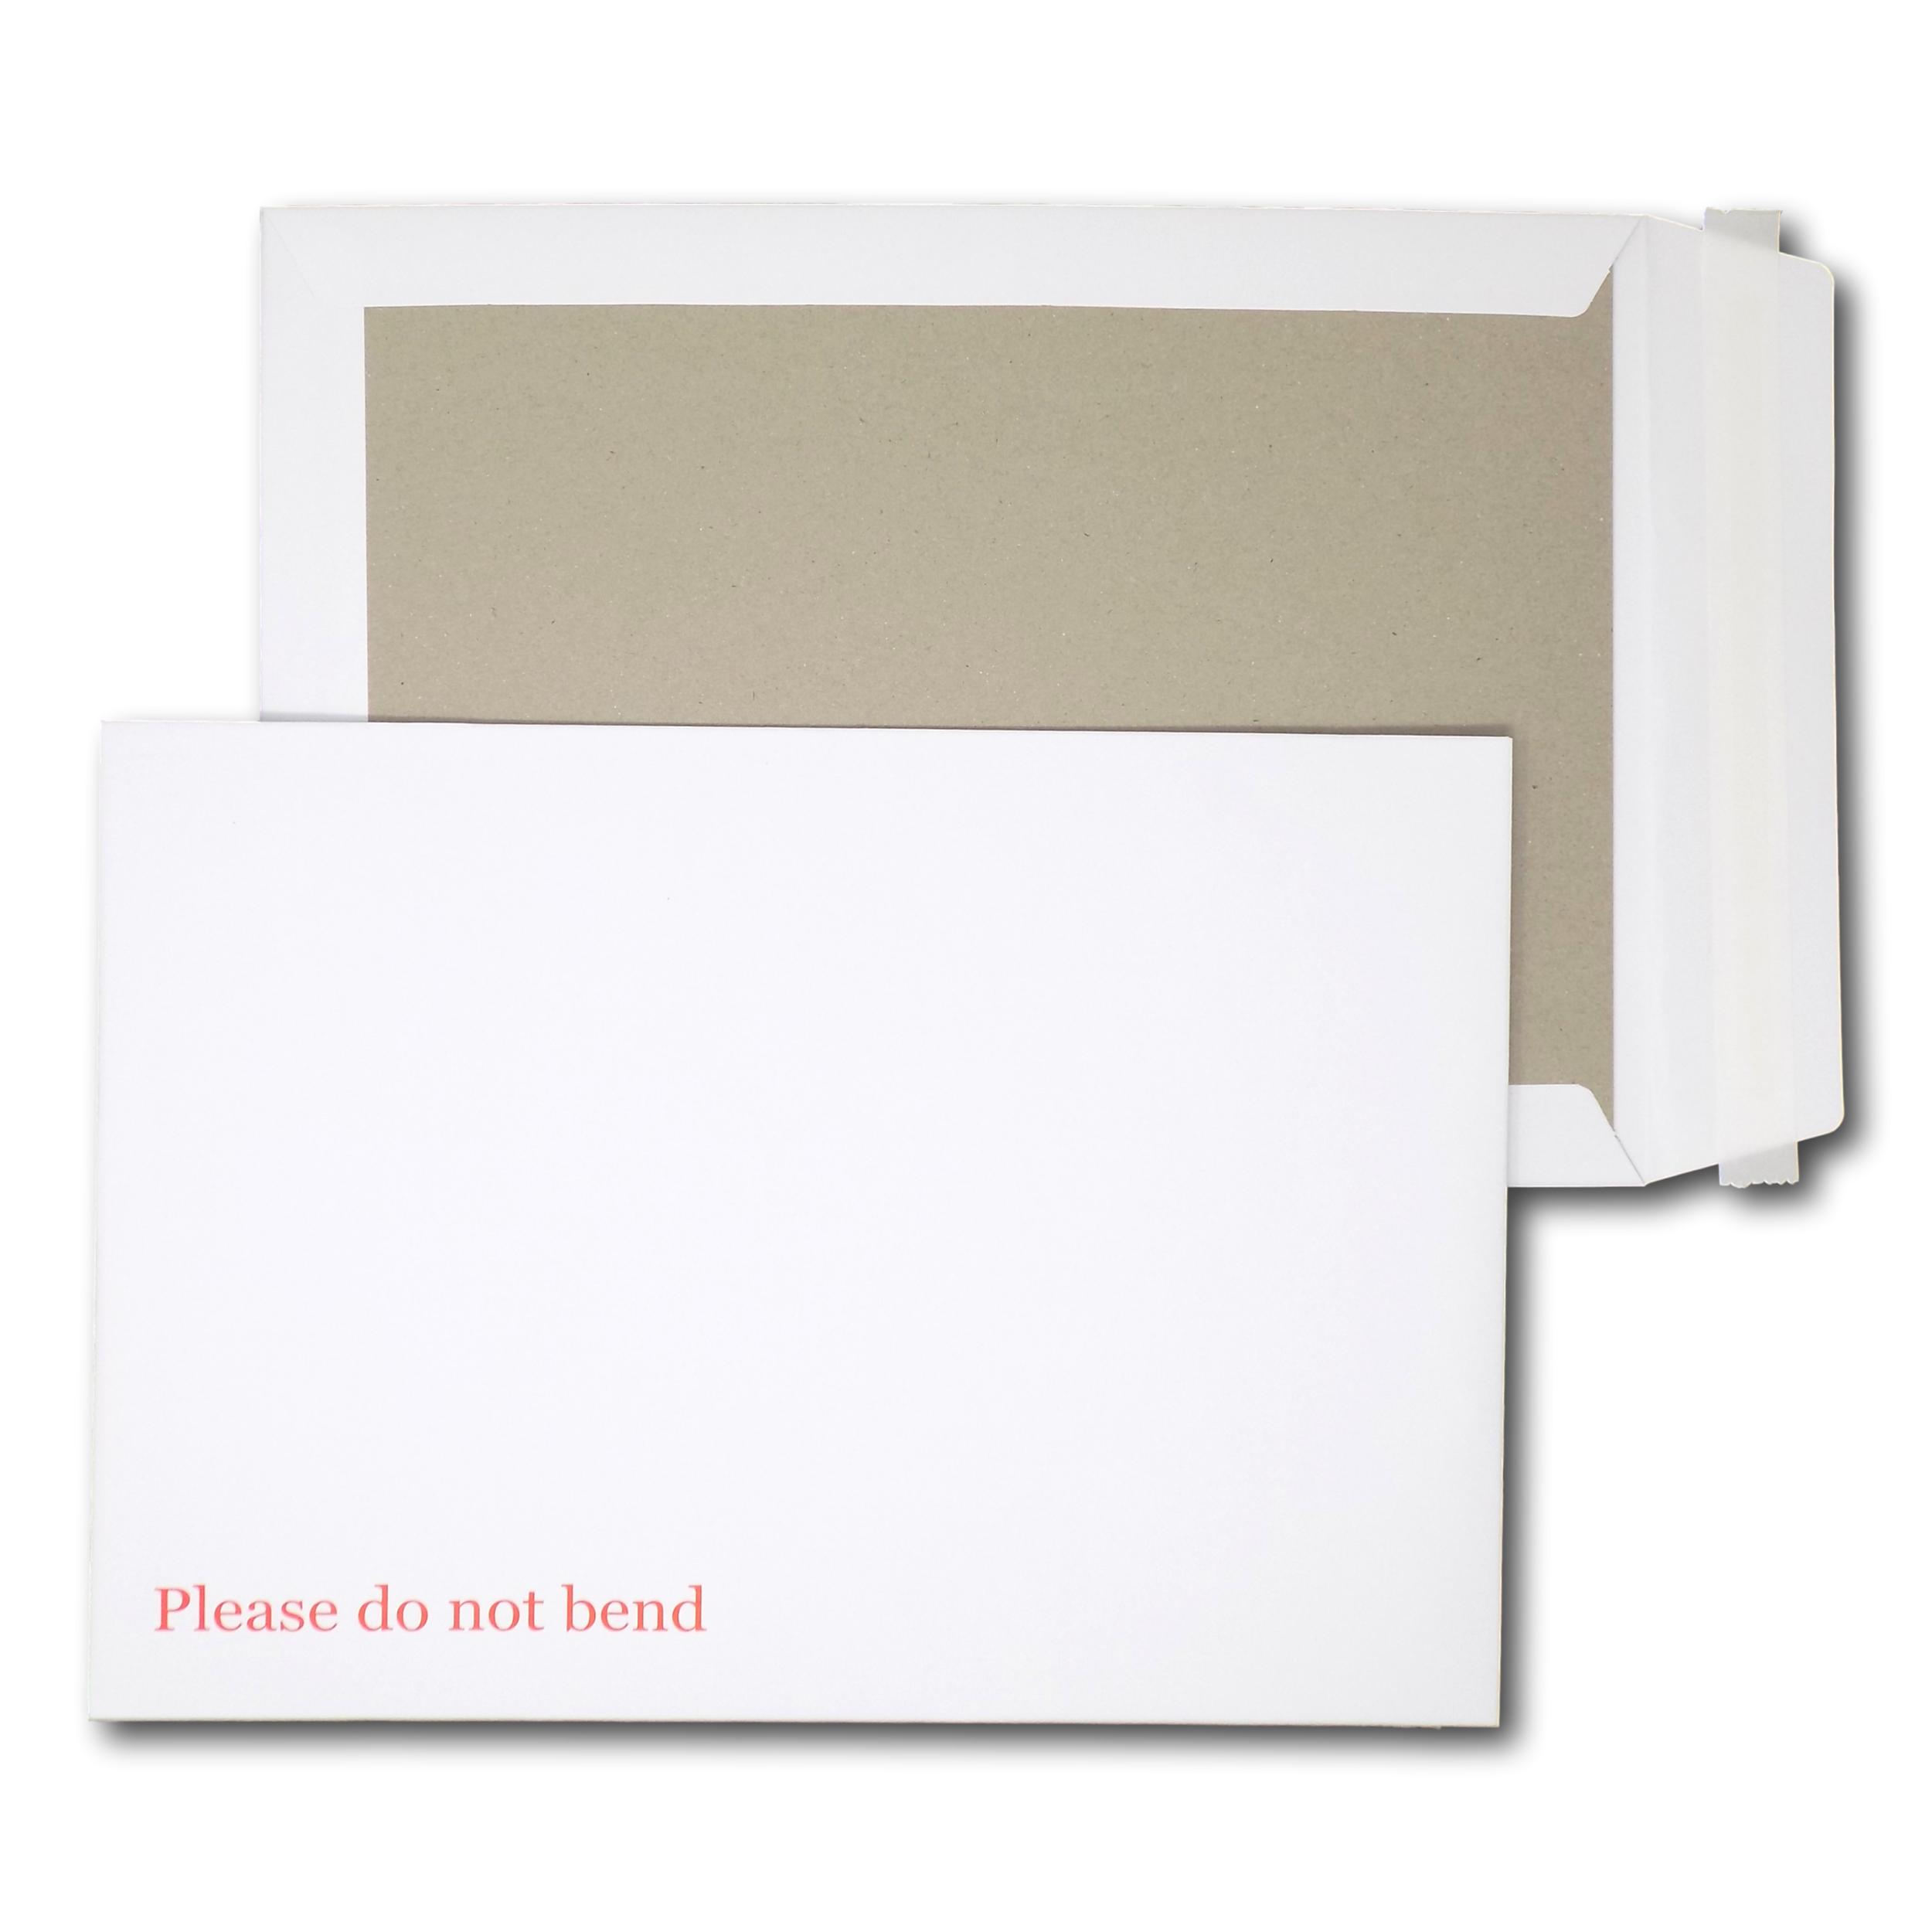 Board Backed Envelopes - A4 / C4 - 324mm x 229mm - Printed - WHITE - Pack of 25